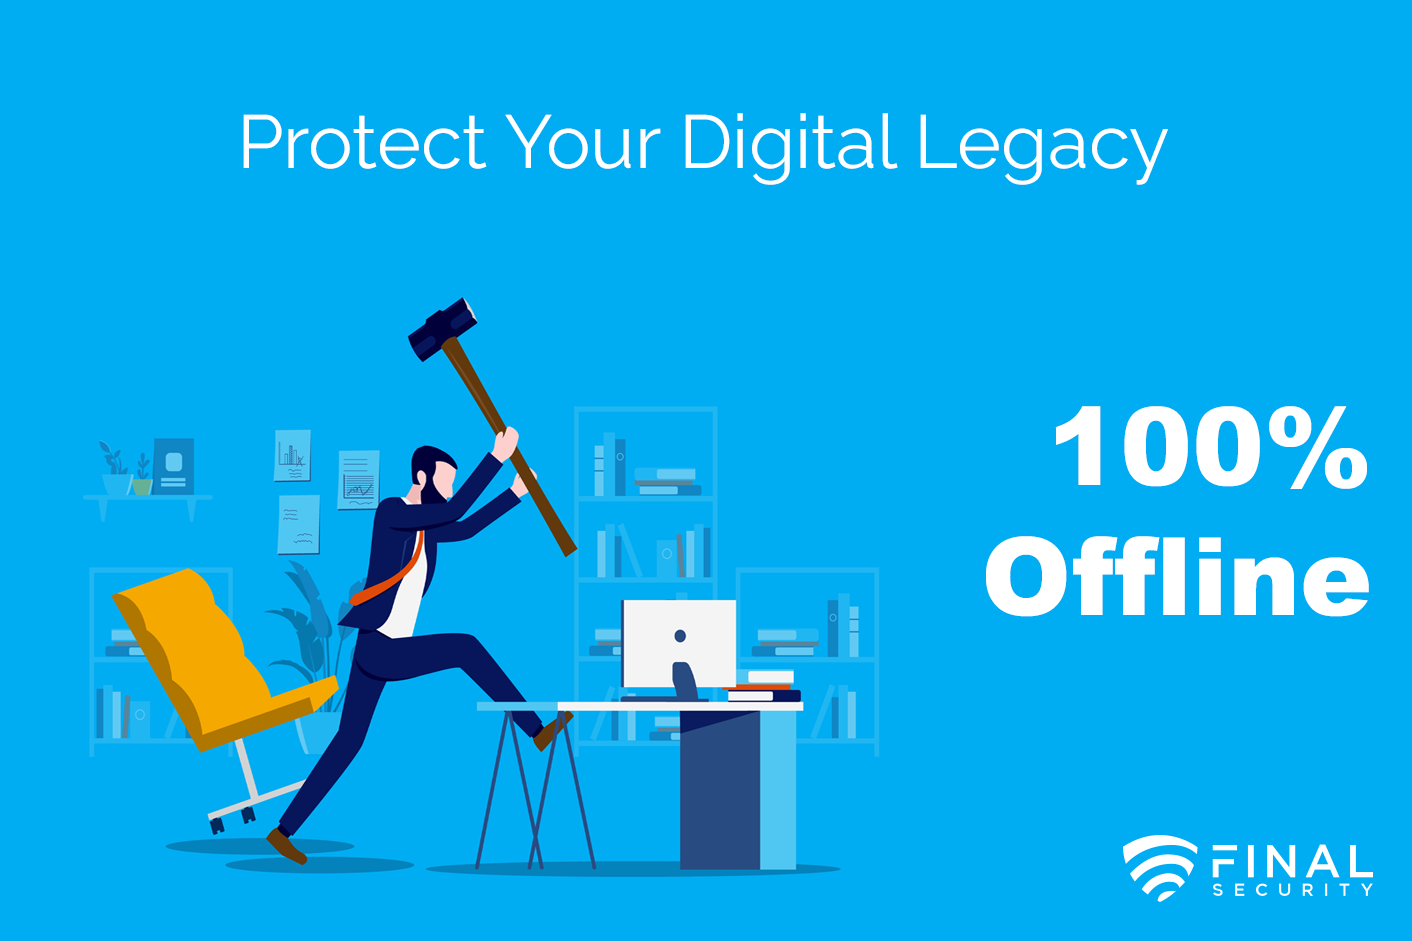 Protect Your Digital Legacy, 100% Offline by Final Security